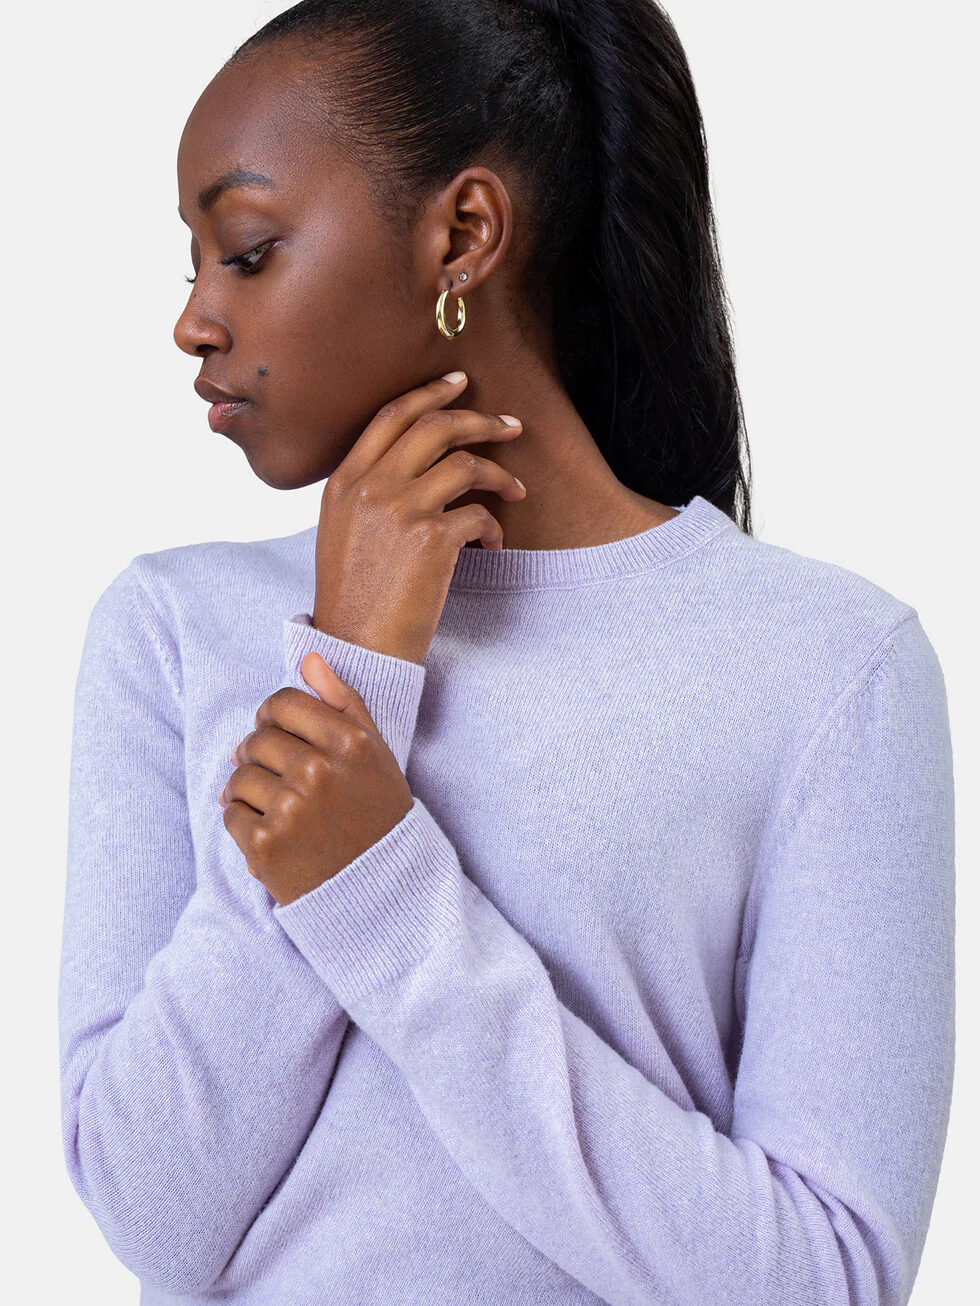 A woman in a lavender sweater gazes to the side with her hand on her neck.